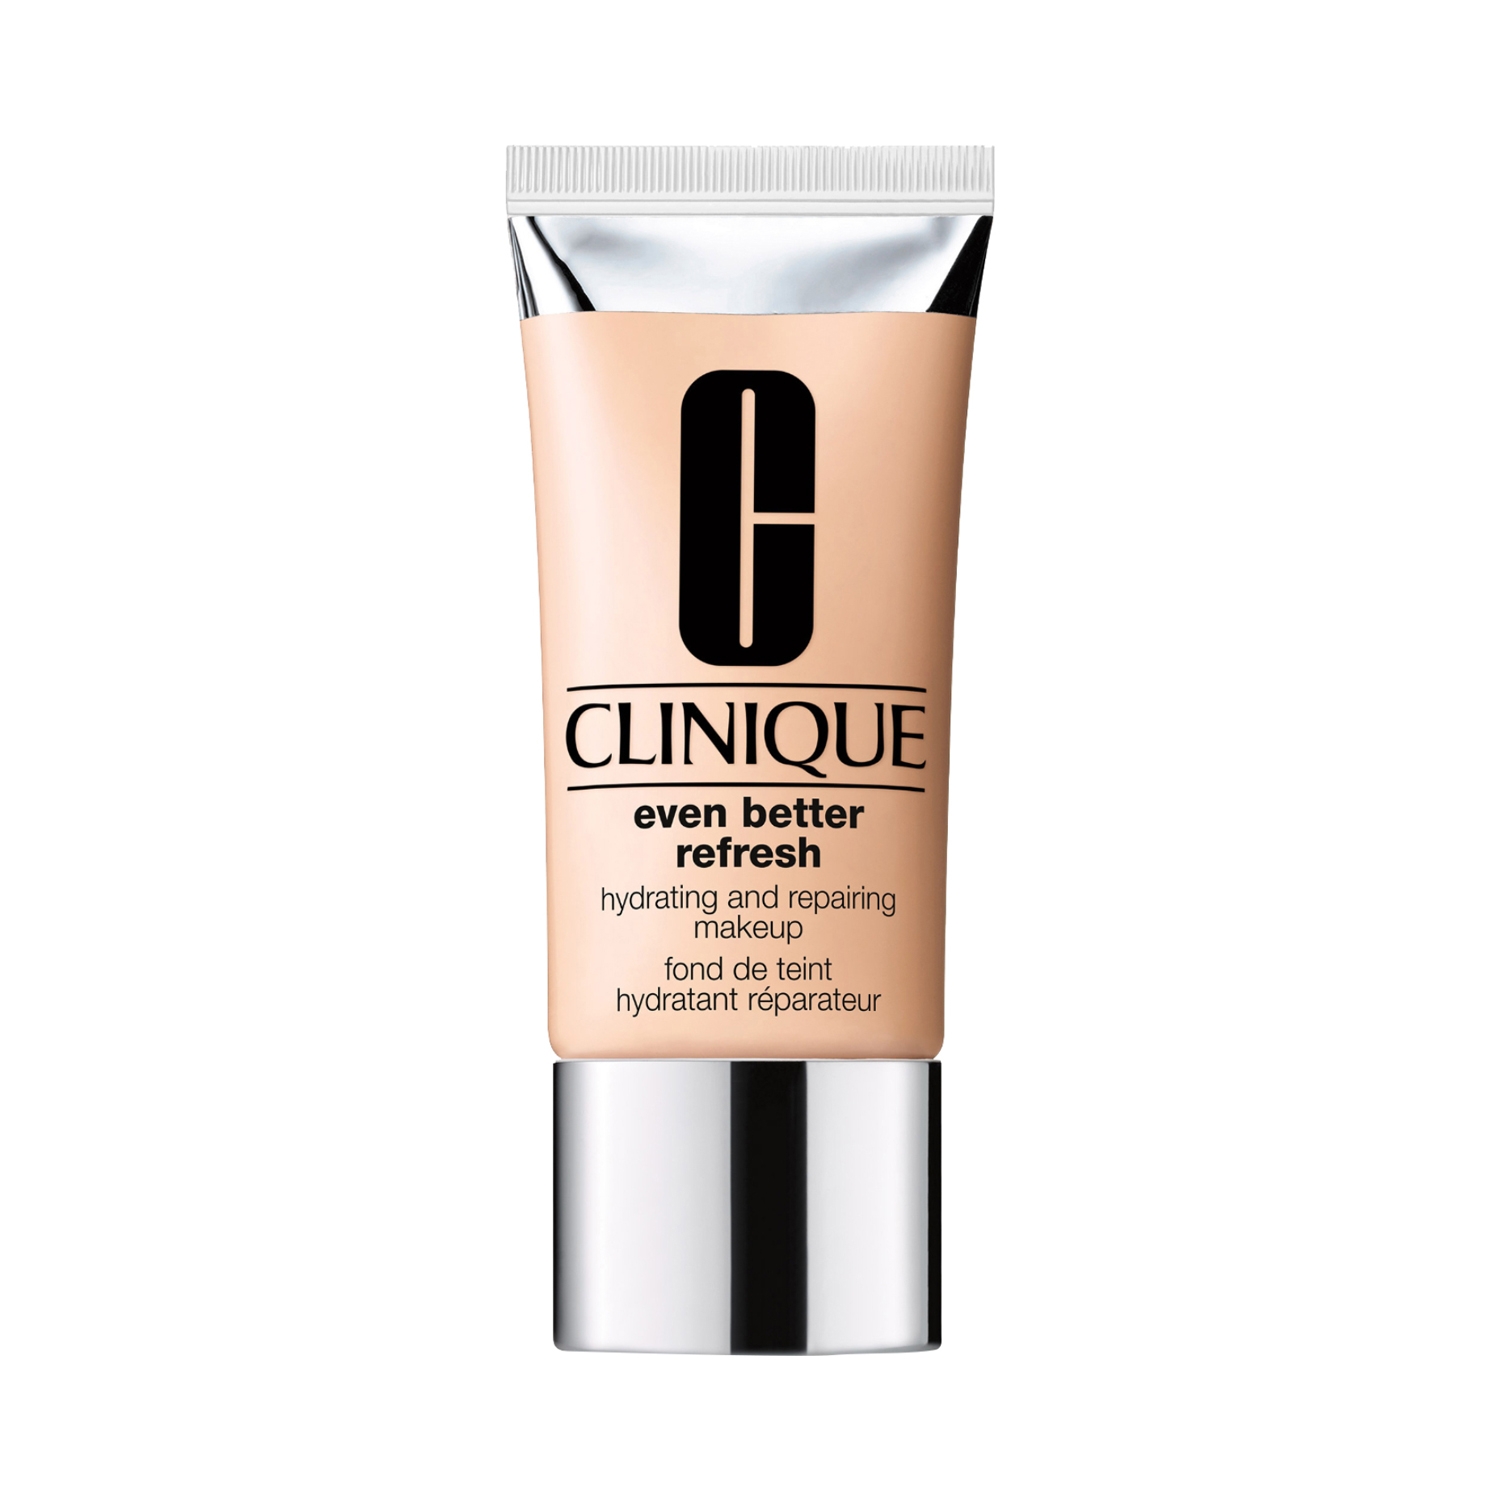 CLINIQUE | CLINIQUE Even Better Refresh Hydrating And Repairing Makeup Foundation - CN 28 Ivory (30ml)